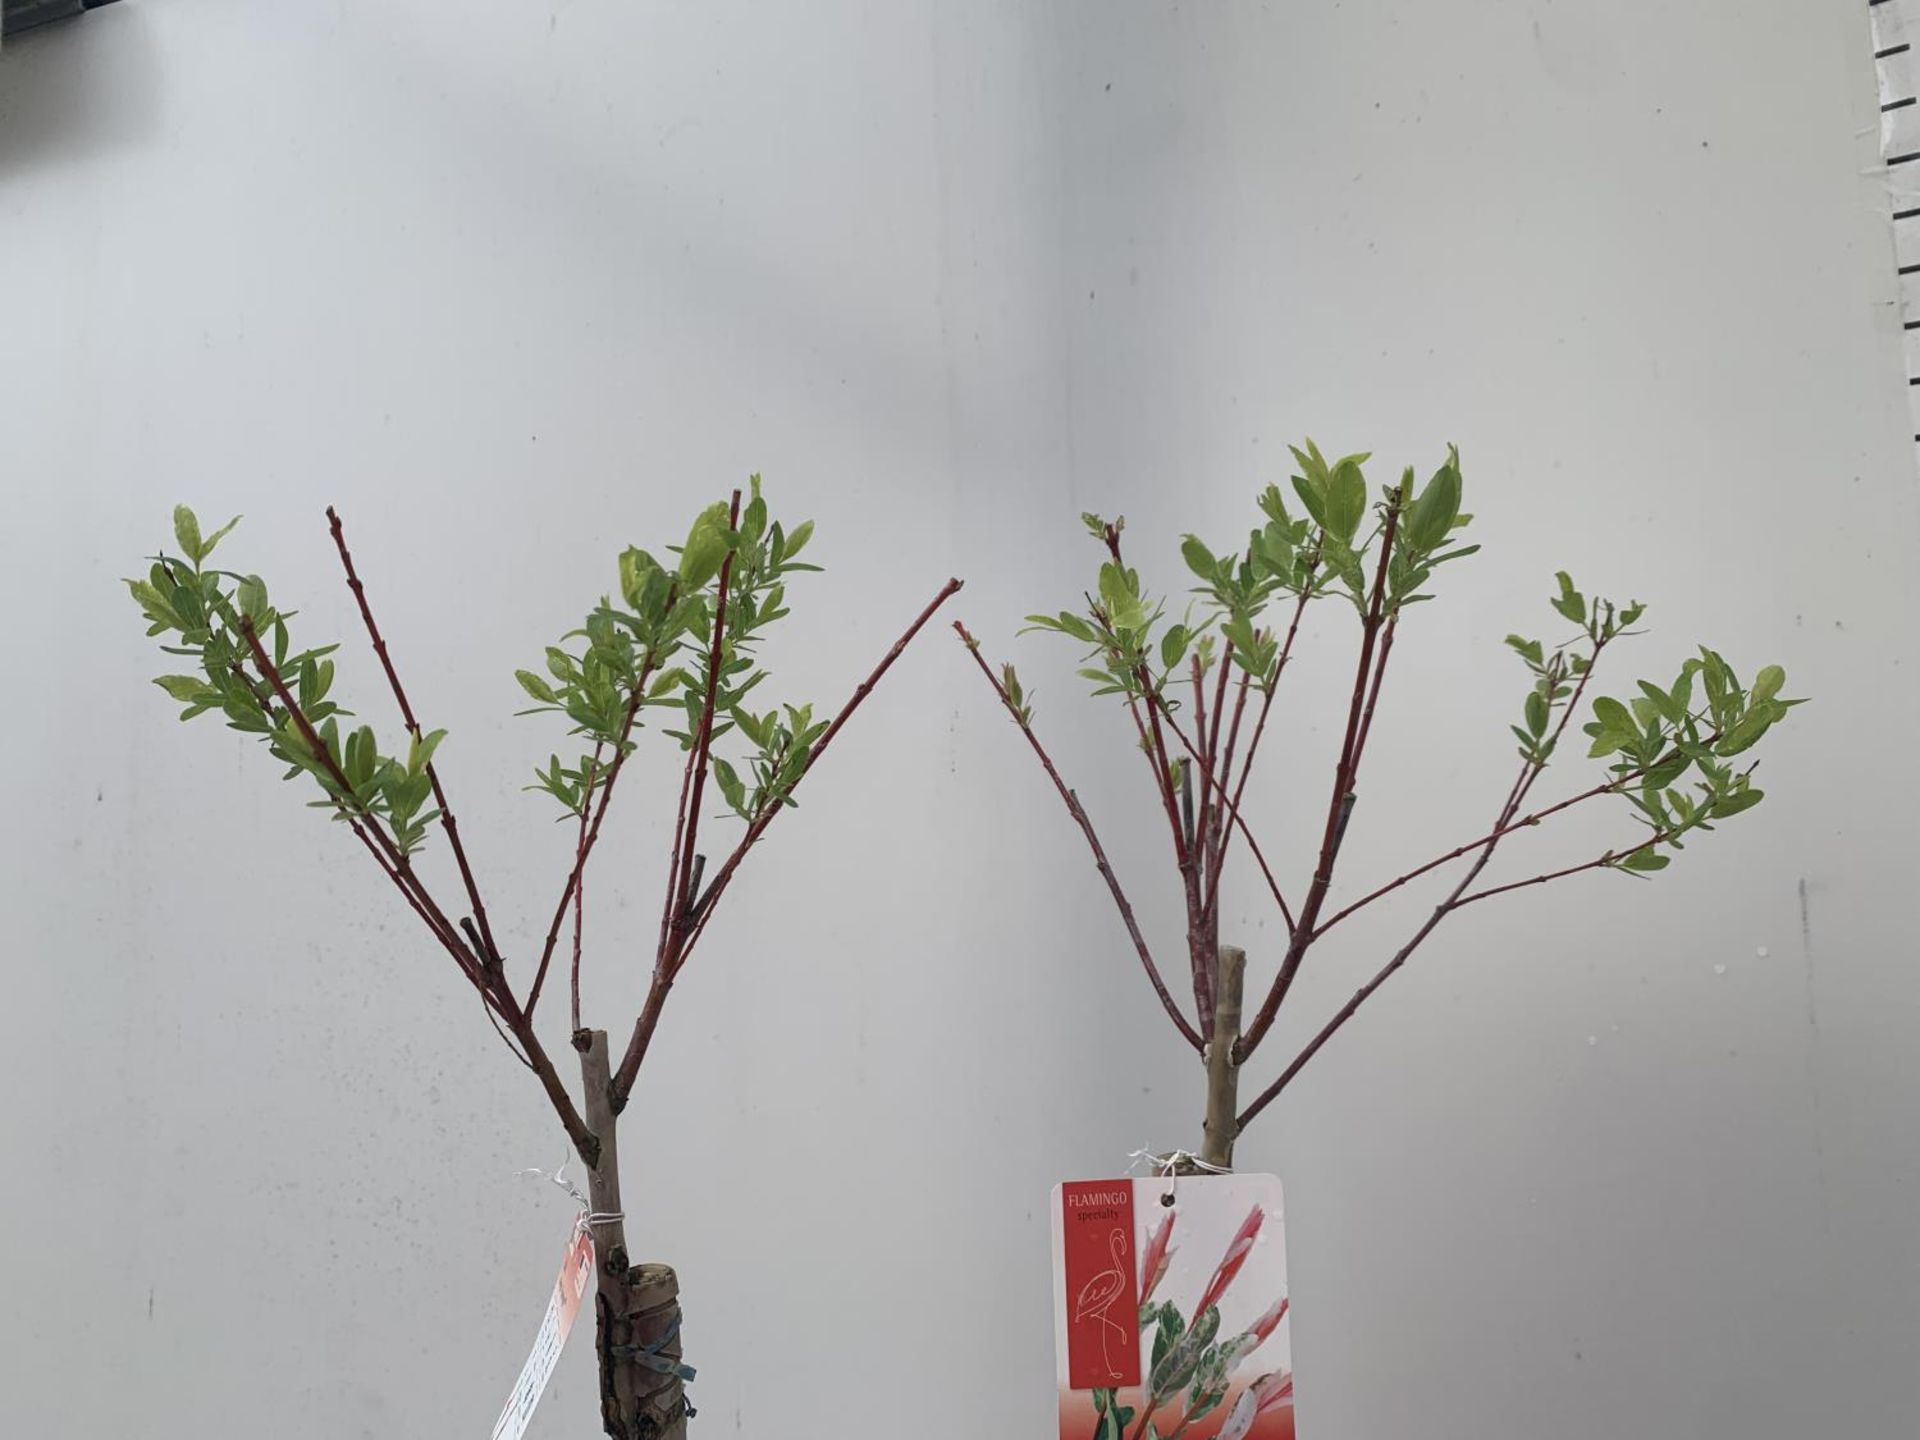 TWO STANDARD SALIX INTEGRA 'FLAMINGO' OVER 110CM IN HEIGHT IN 3 LTR POTS PLUS VAT TO BE SOLD FOR THE - Image 2 of 4